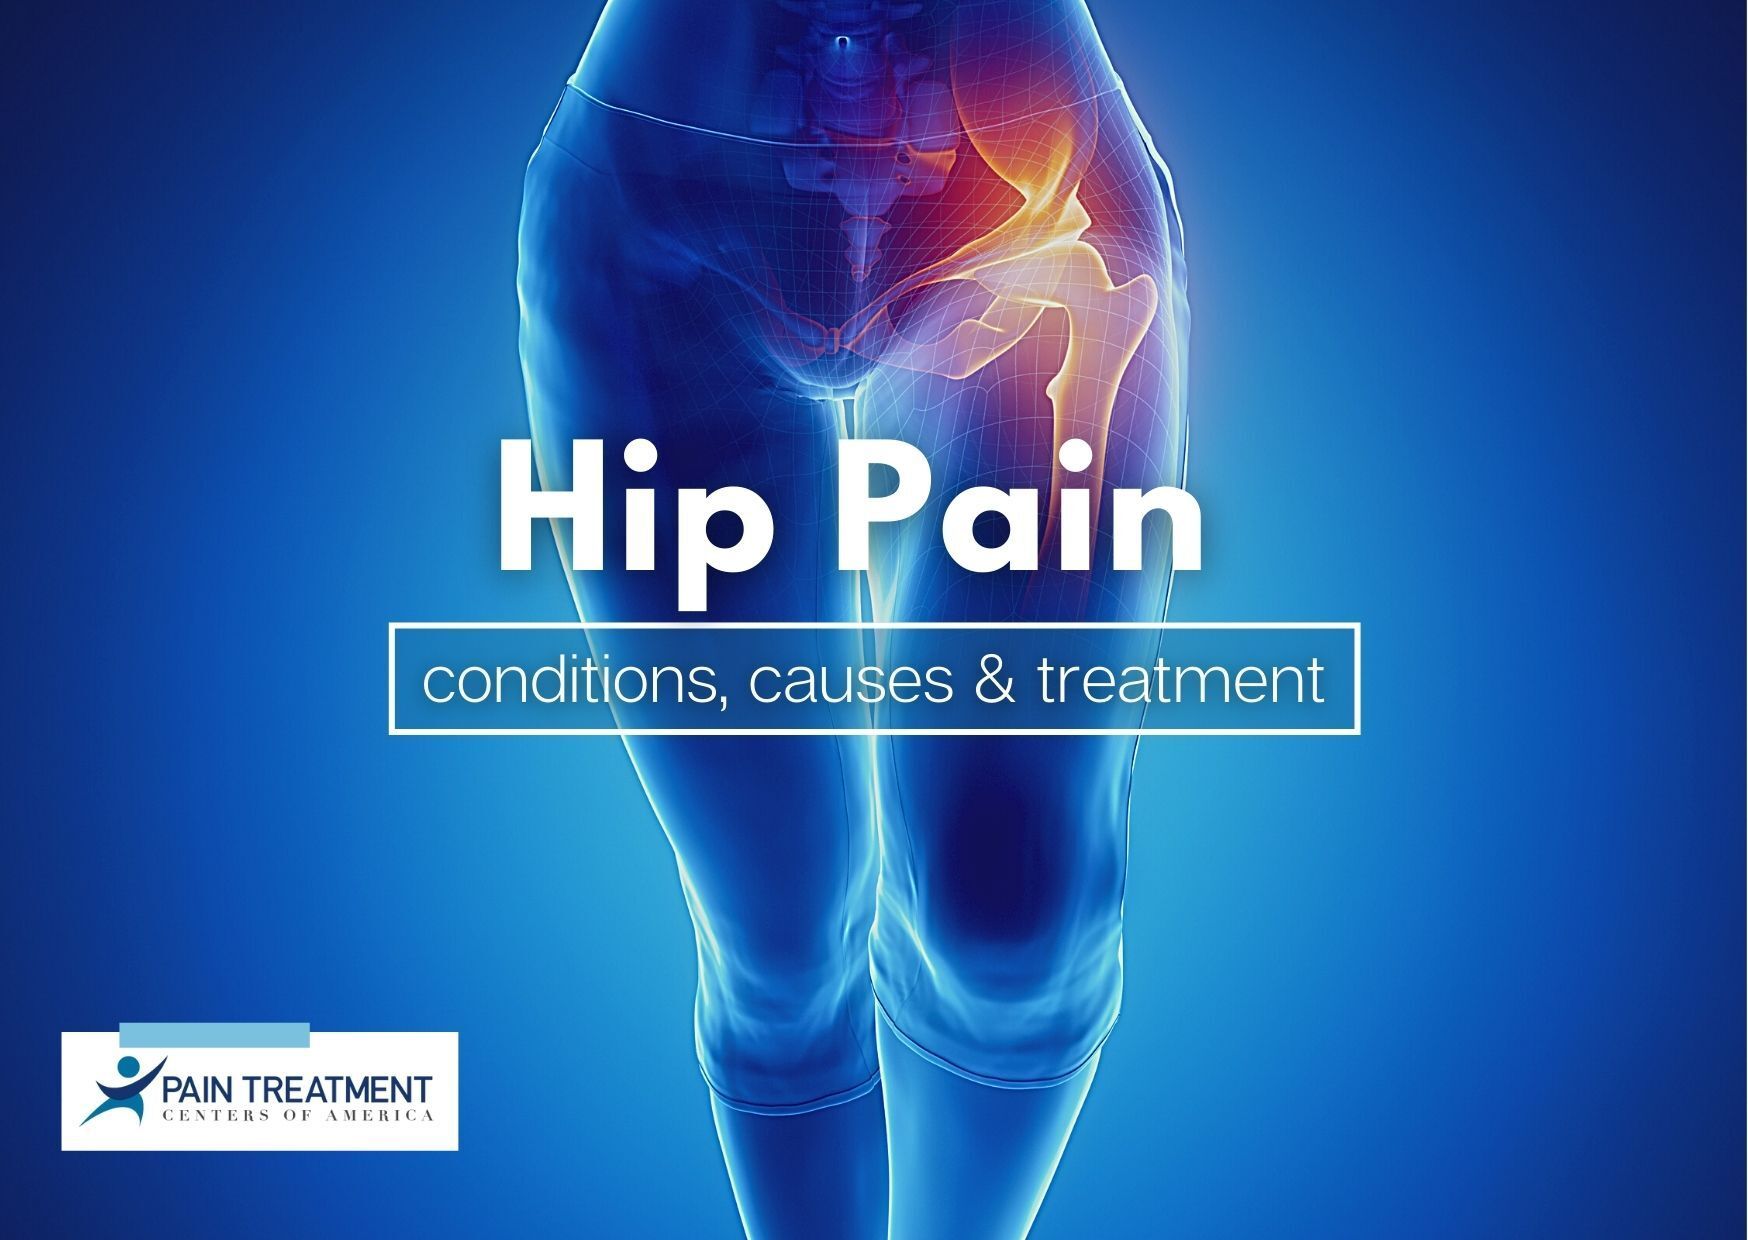 What can be mistaken for hip pain?